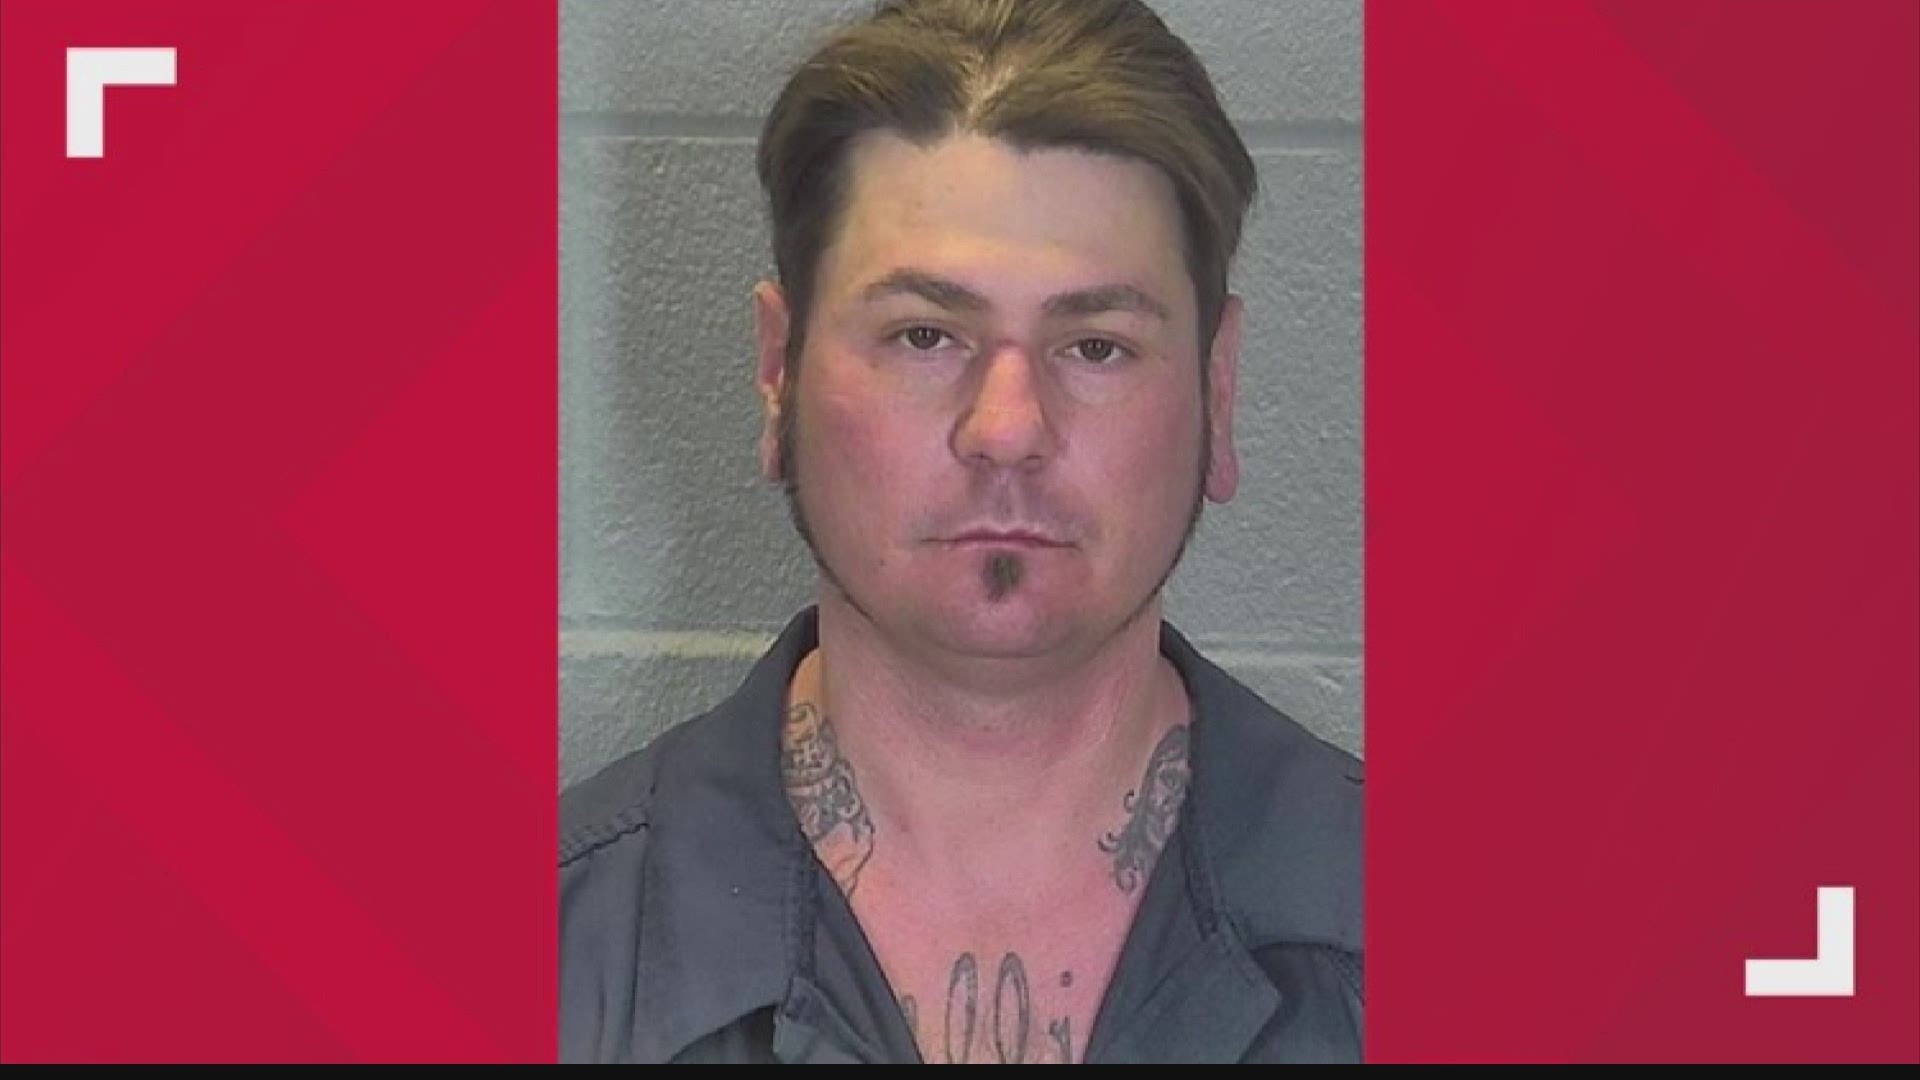 Police say James Chadwell II forced his young neighbor into his basement and assaulted her before police rescued the girl.